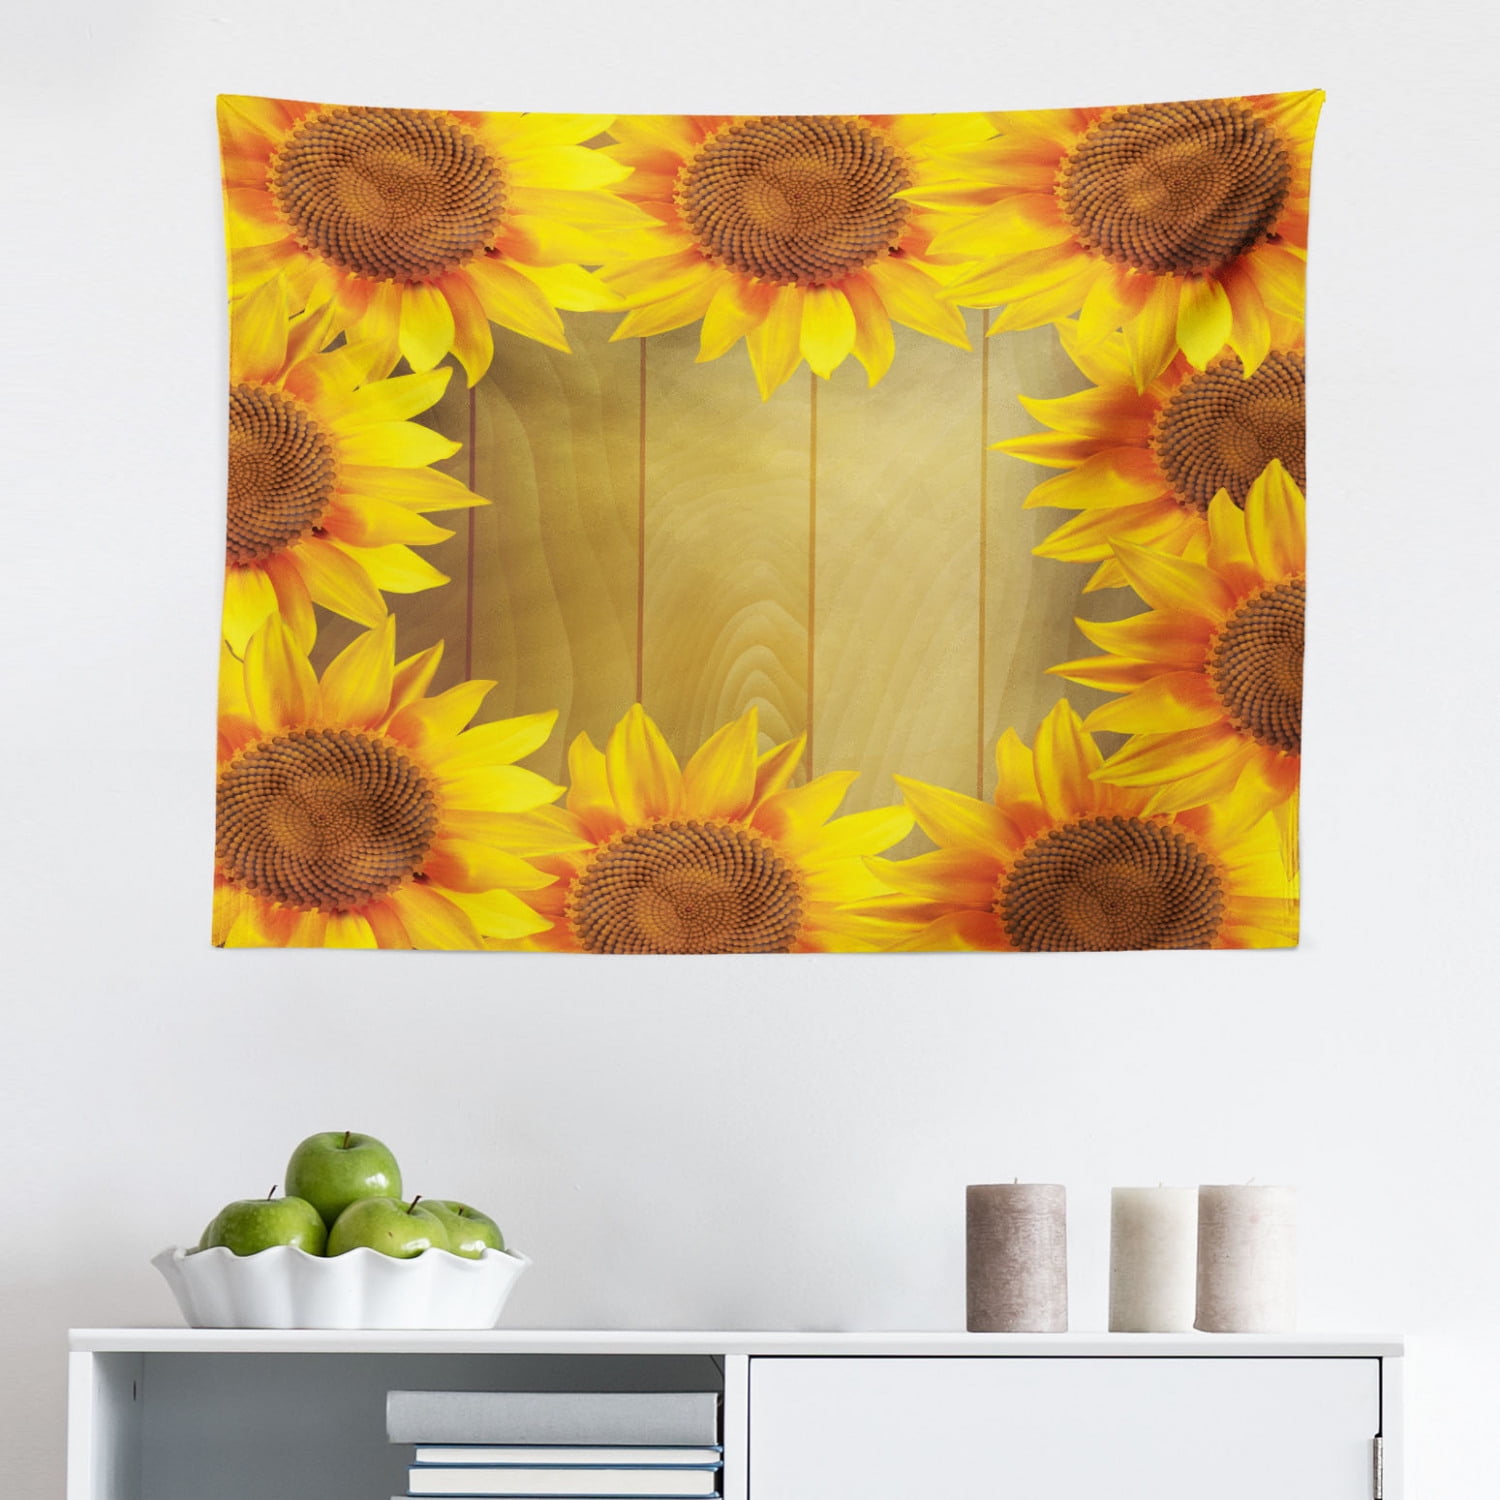 Shine Sunflower Pattern Tapestry Room Wall Hanging Floral Landscape Tapestry USA 